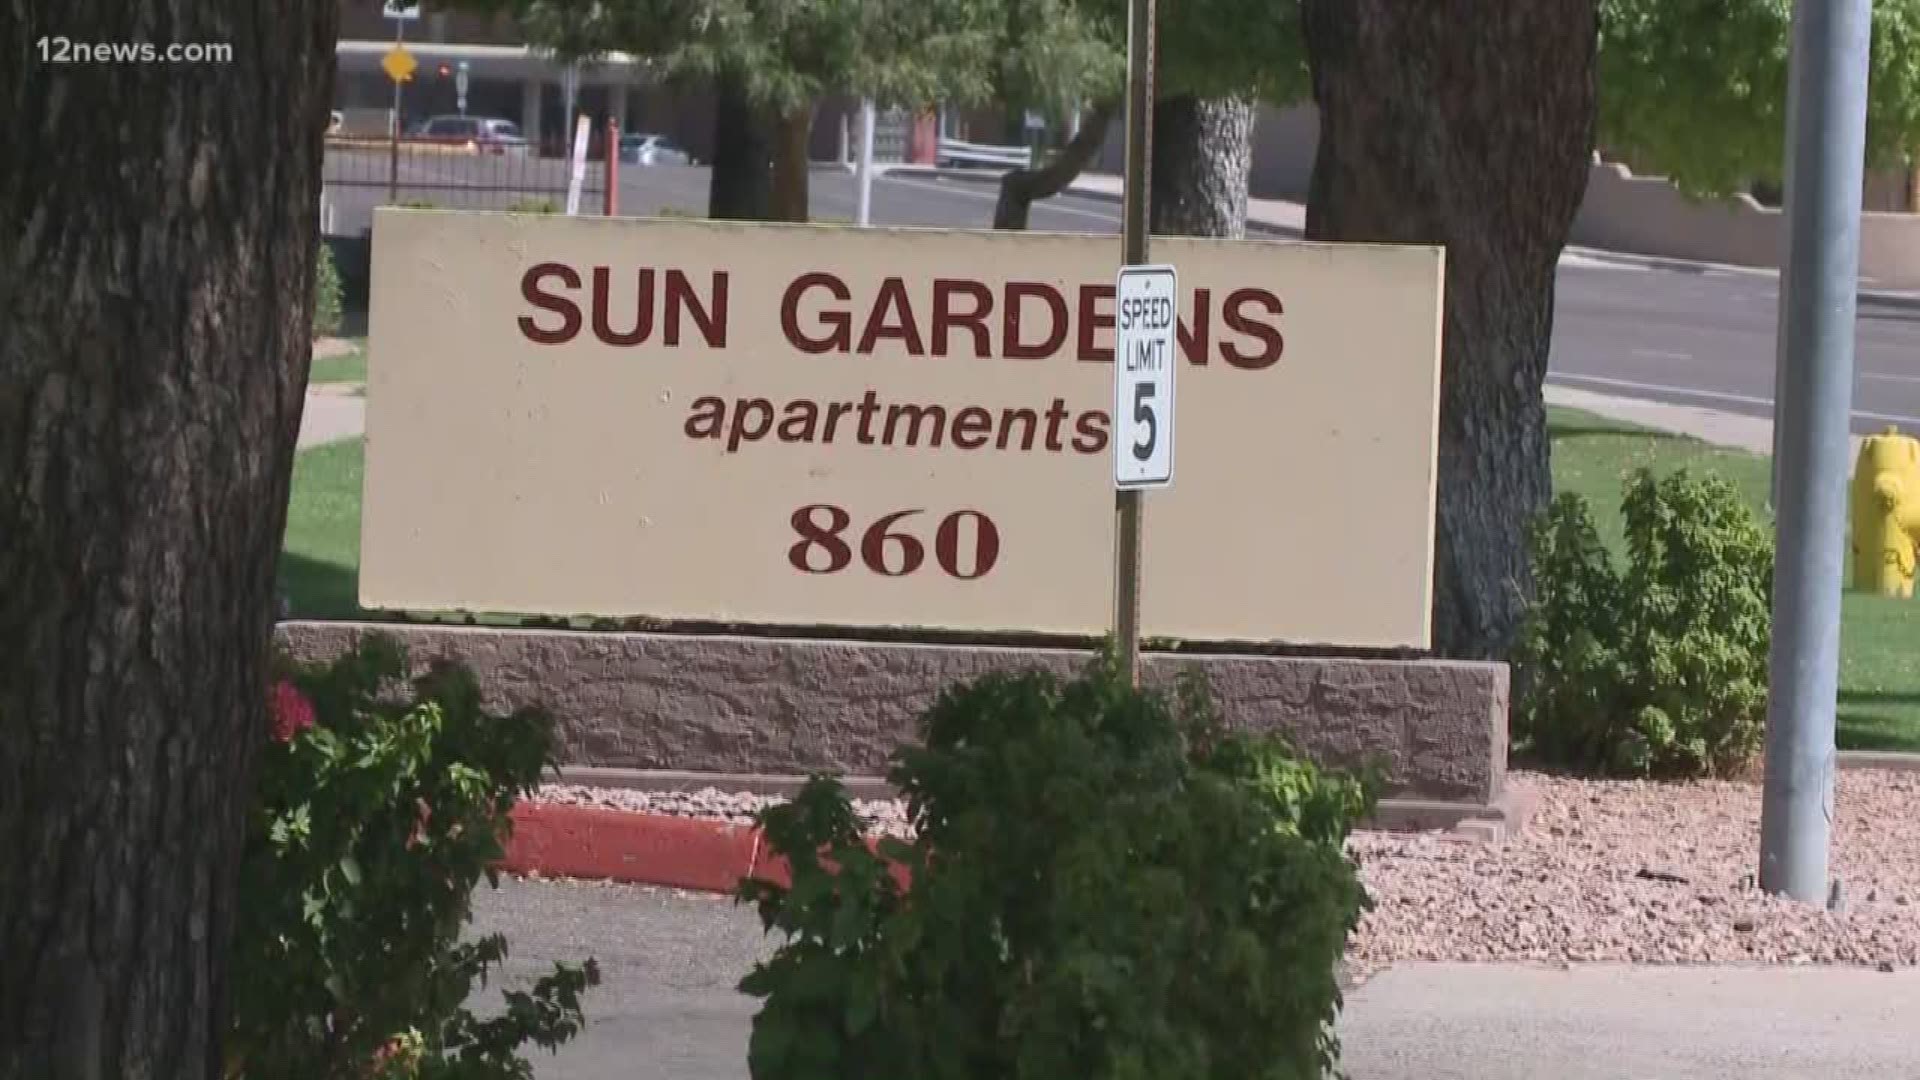 Officials raided Paul Petersen's home and office Tuesday night and they also raided an apartment complex in Mesa. The complex is where 8 pregnant women were found.